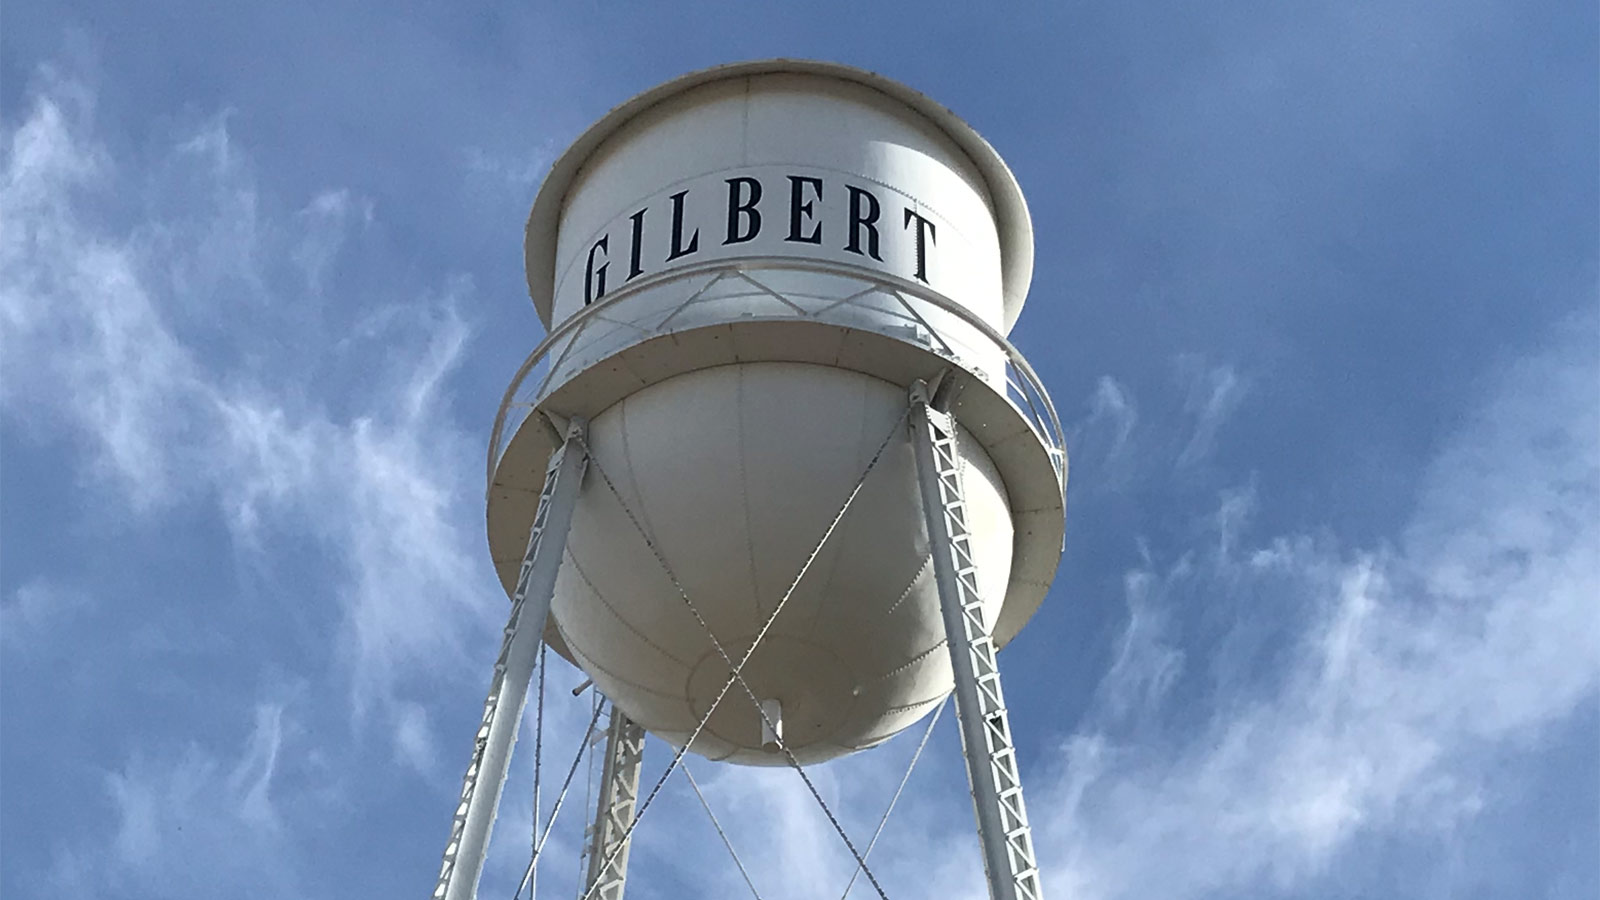 A view of the Gilbert water tower from below, with wispy clouds in the blue sky behind it....